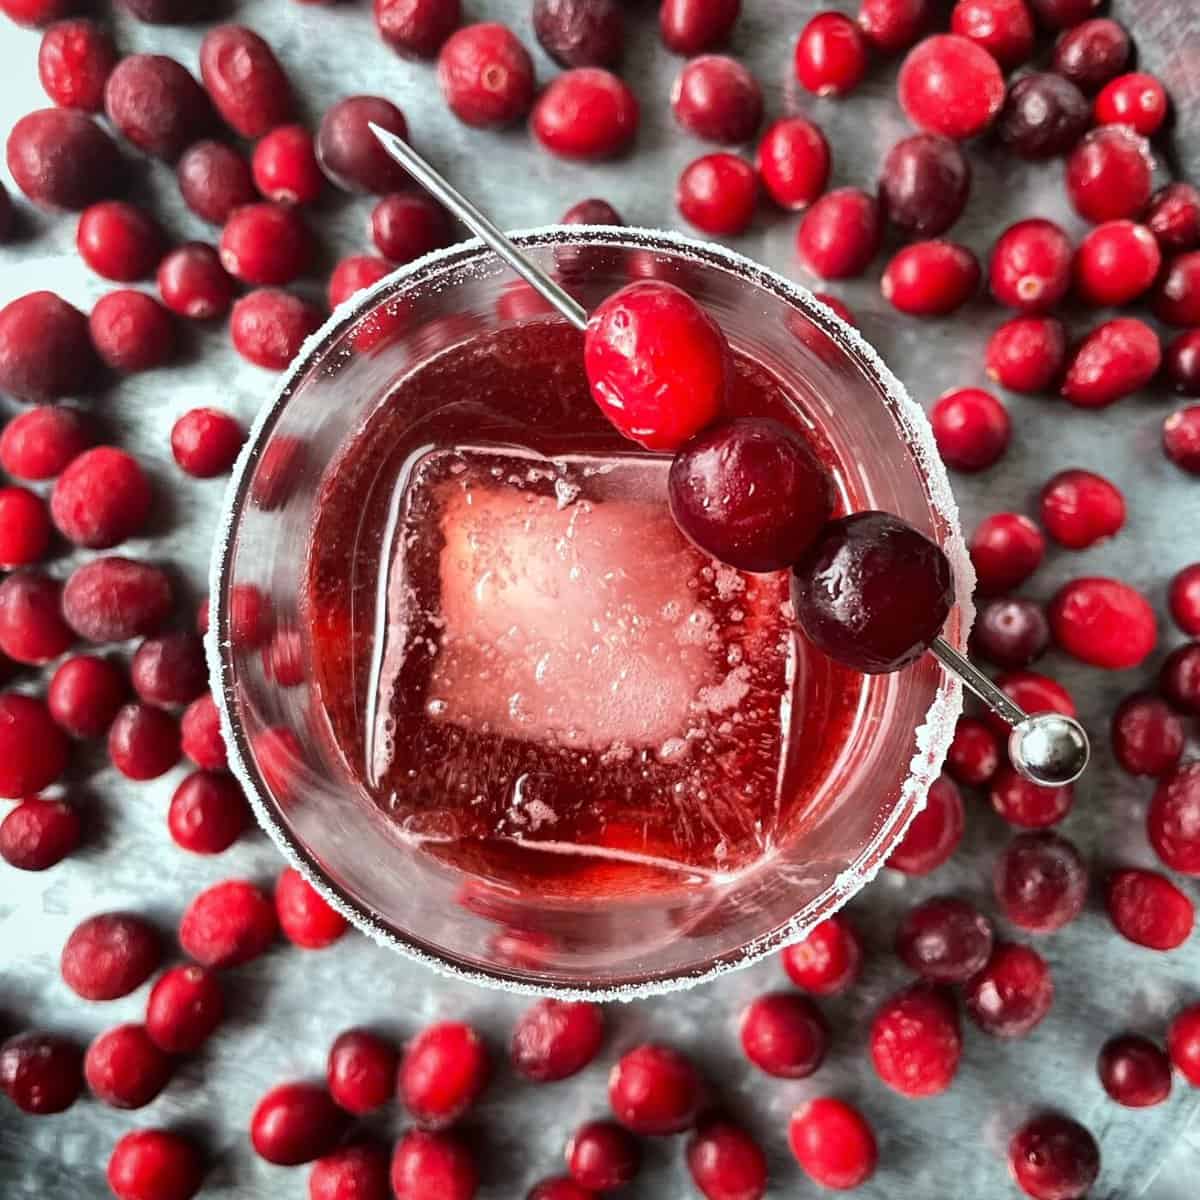 Cranberry Negroni: A Gin and Cranberry Juice Cocktail